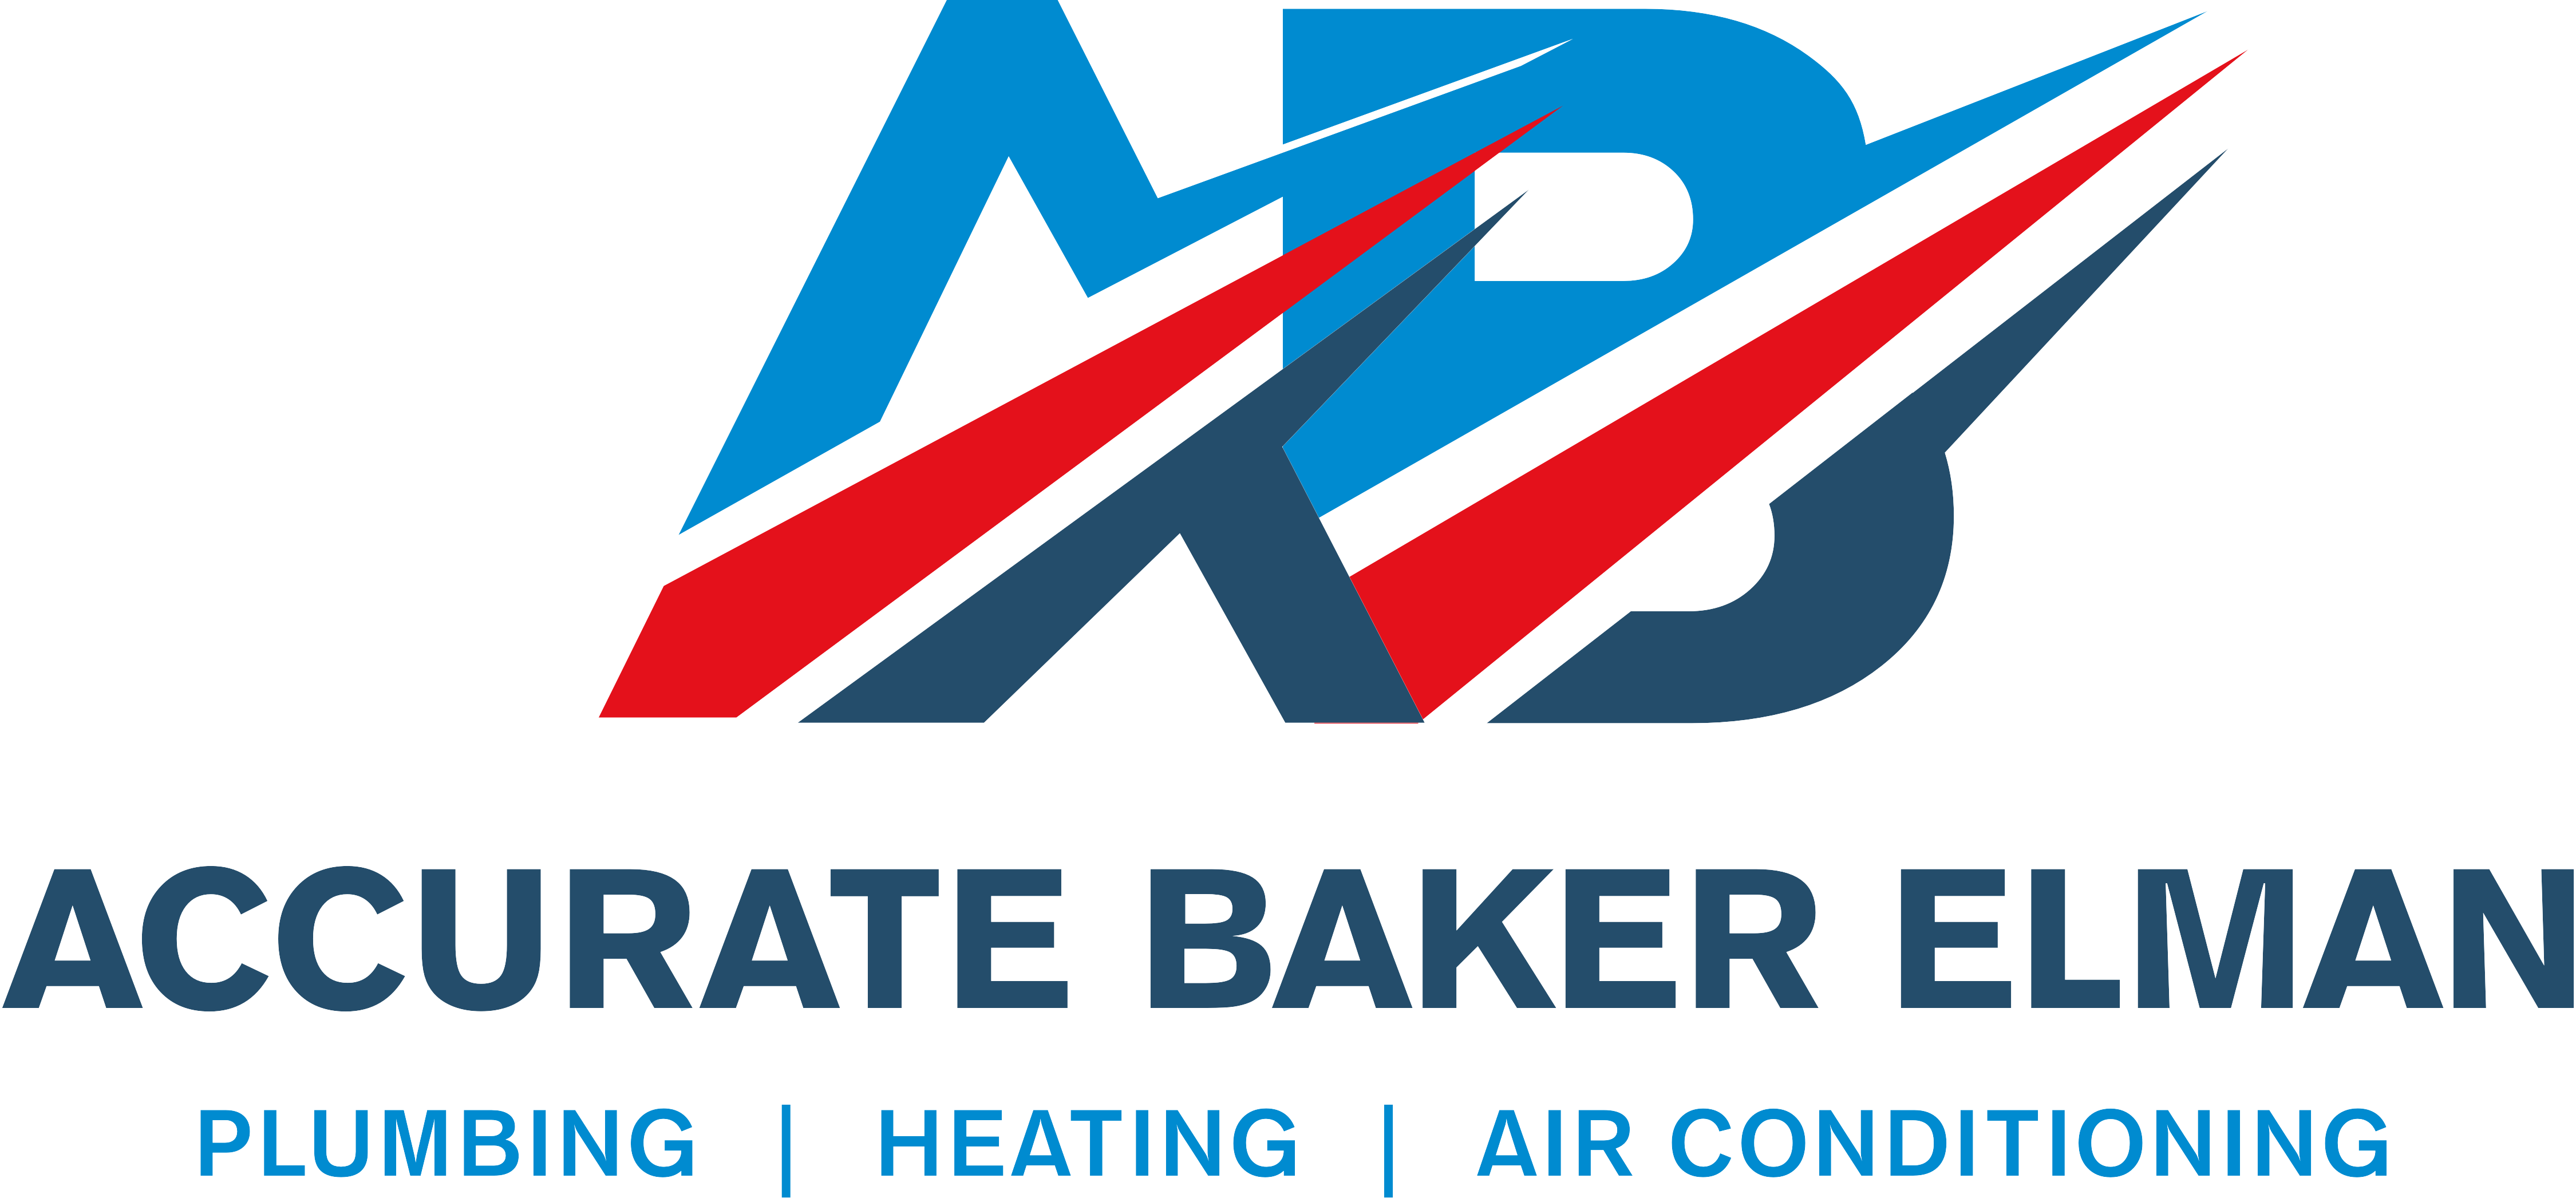 HVAC Services in Franklin MA